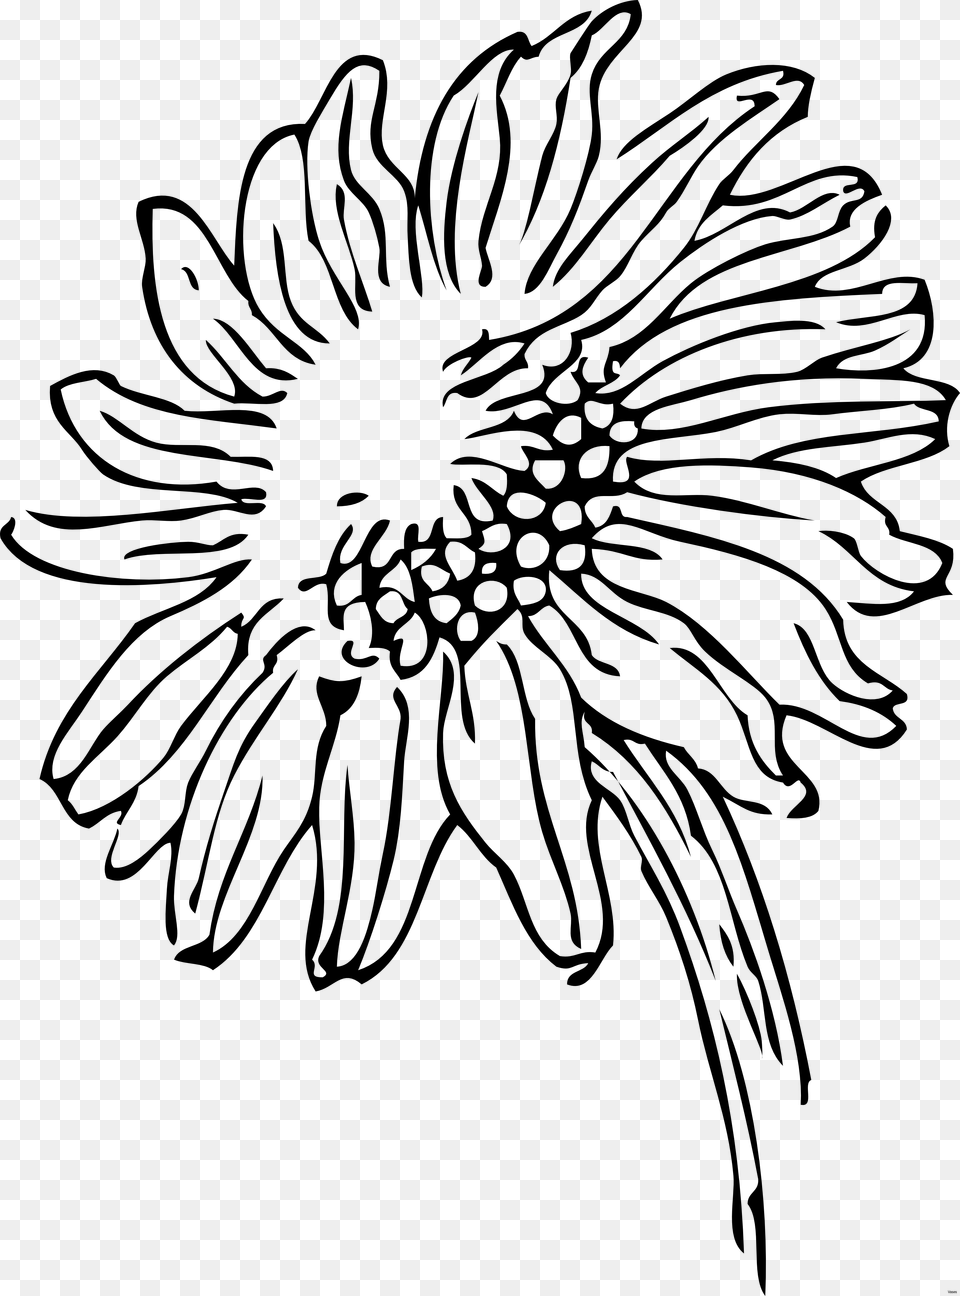 Cornfield Drawing Watercolor Sunflowers Clip Art Black And White, Gray Png